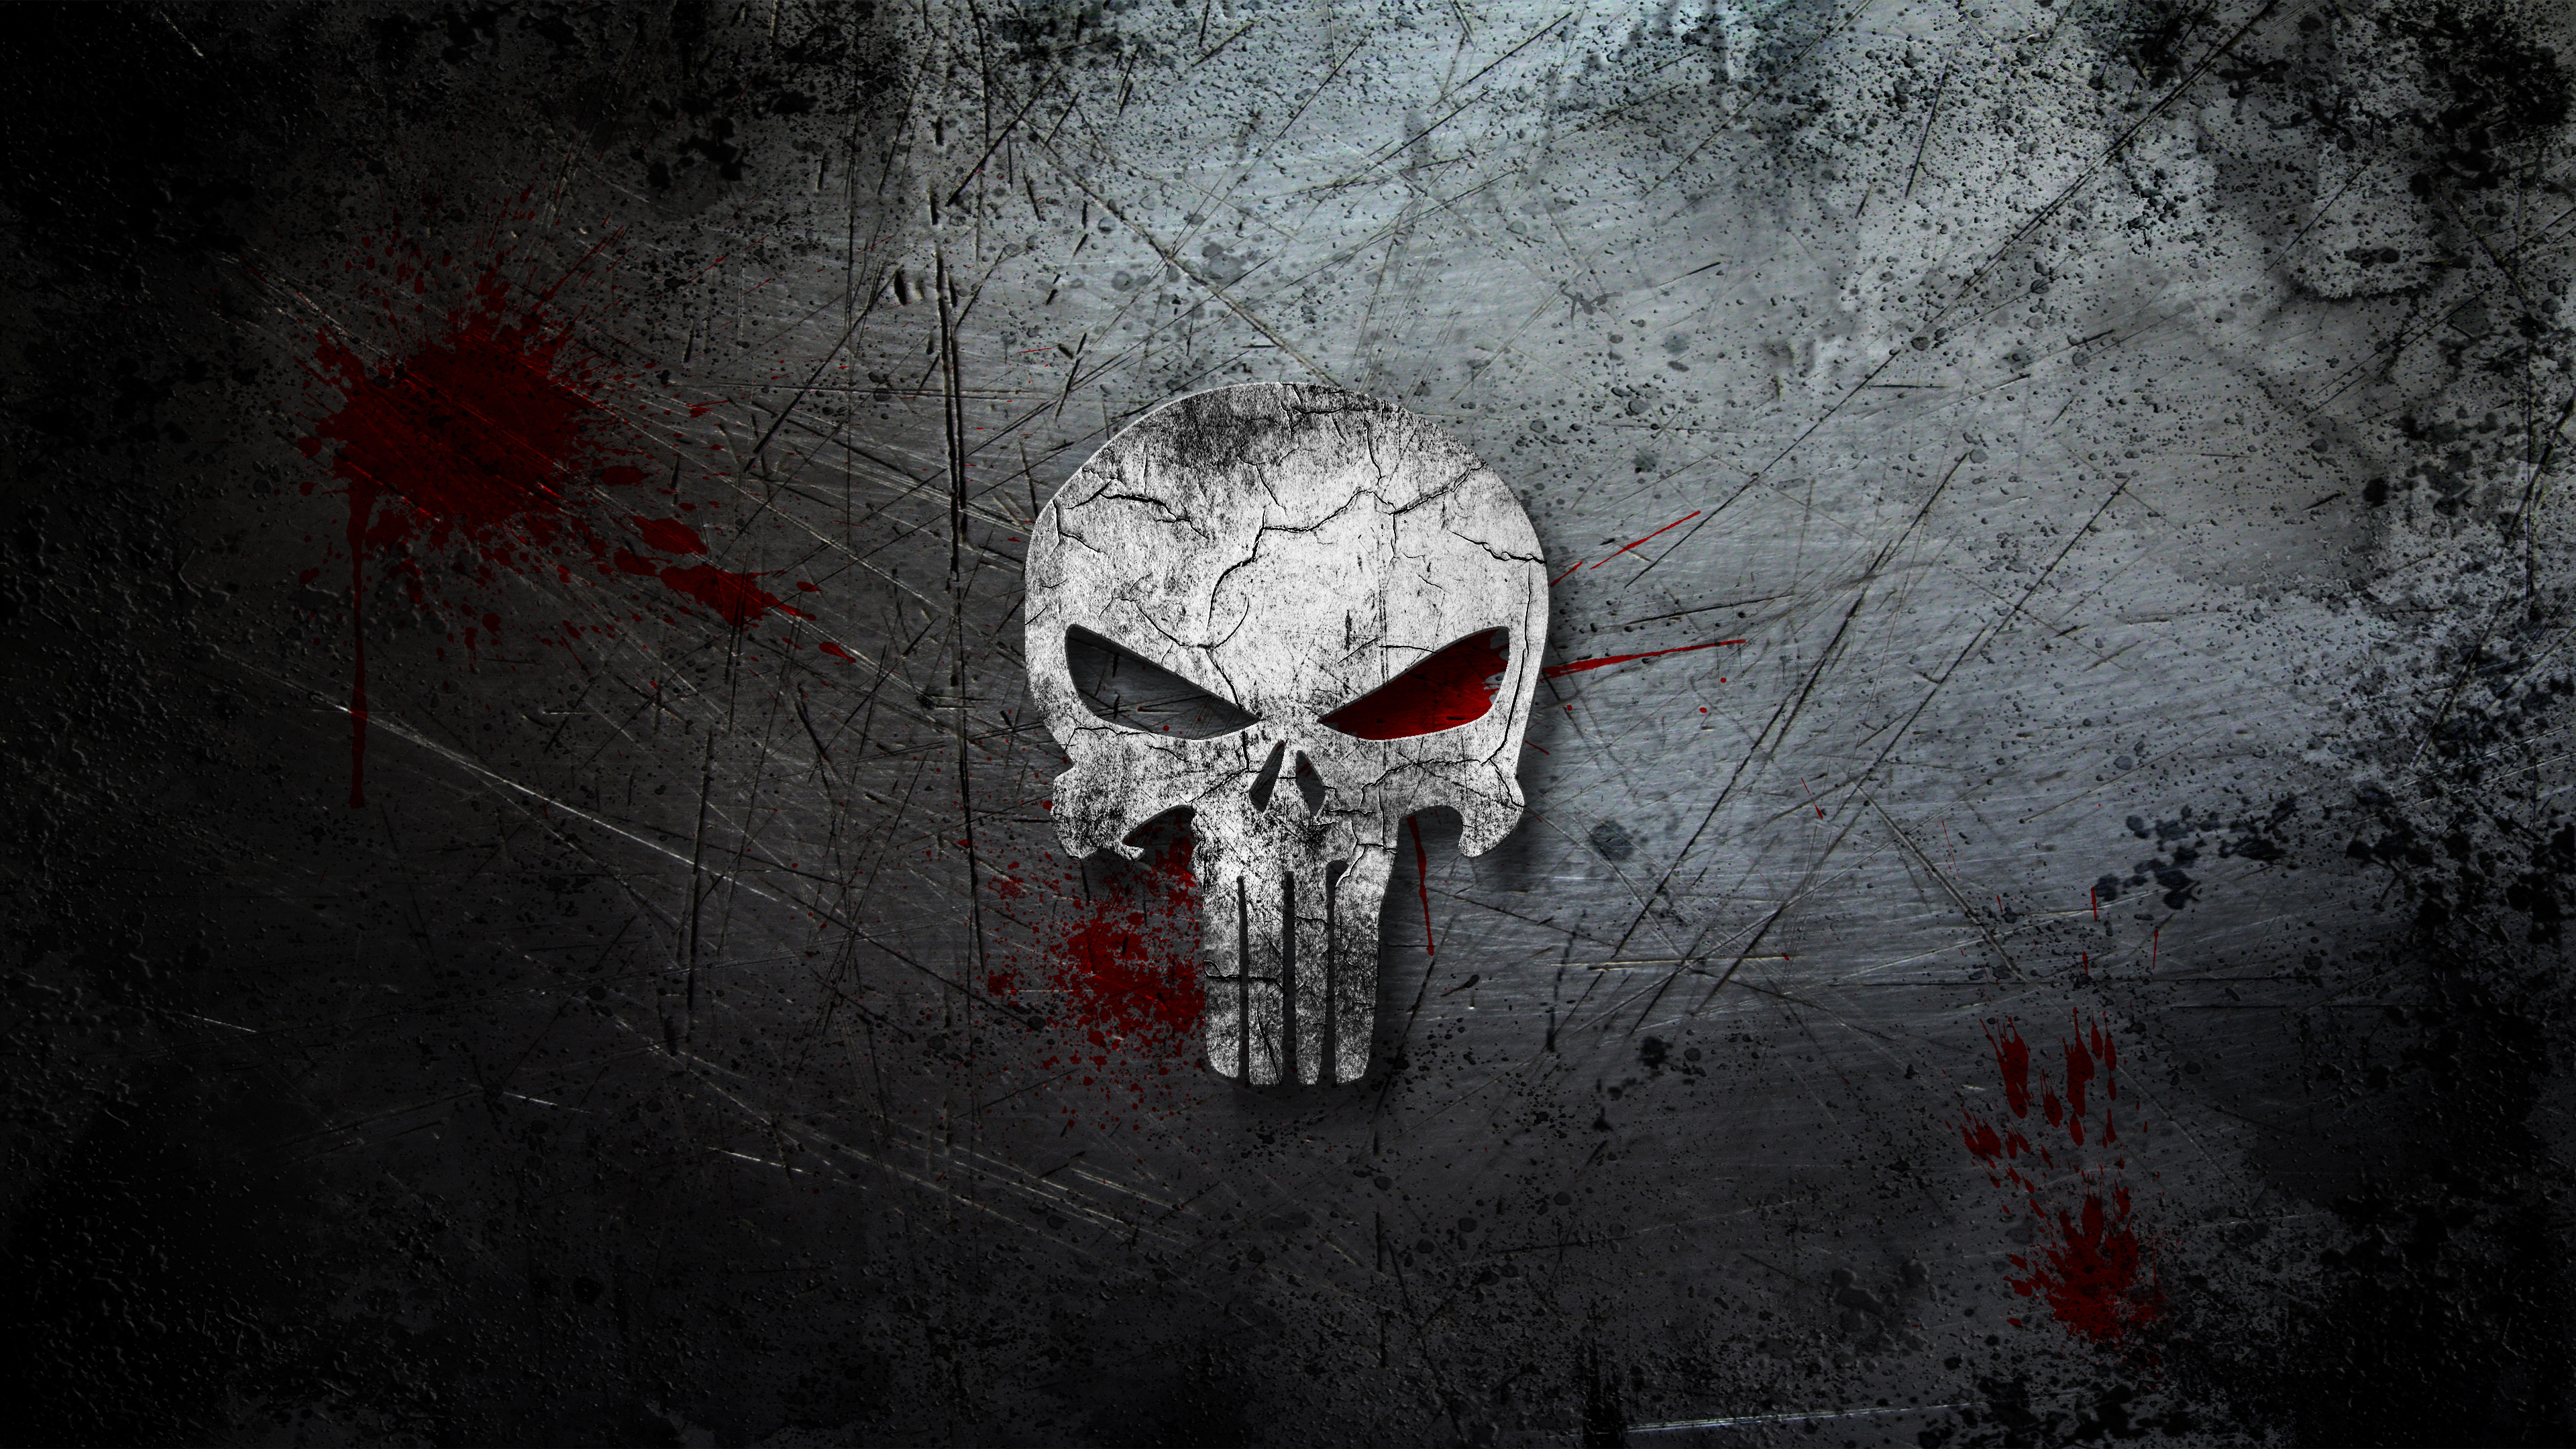 The Punisher HD Wallpaper Background